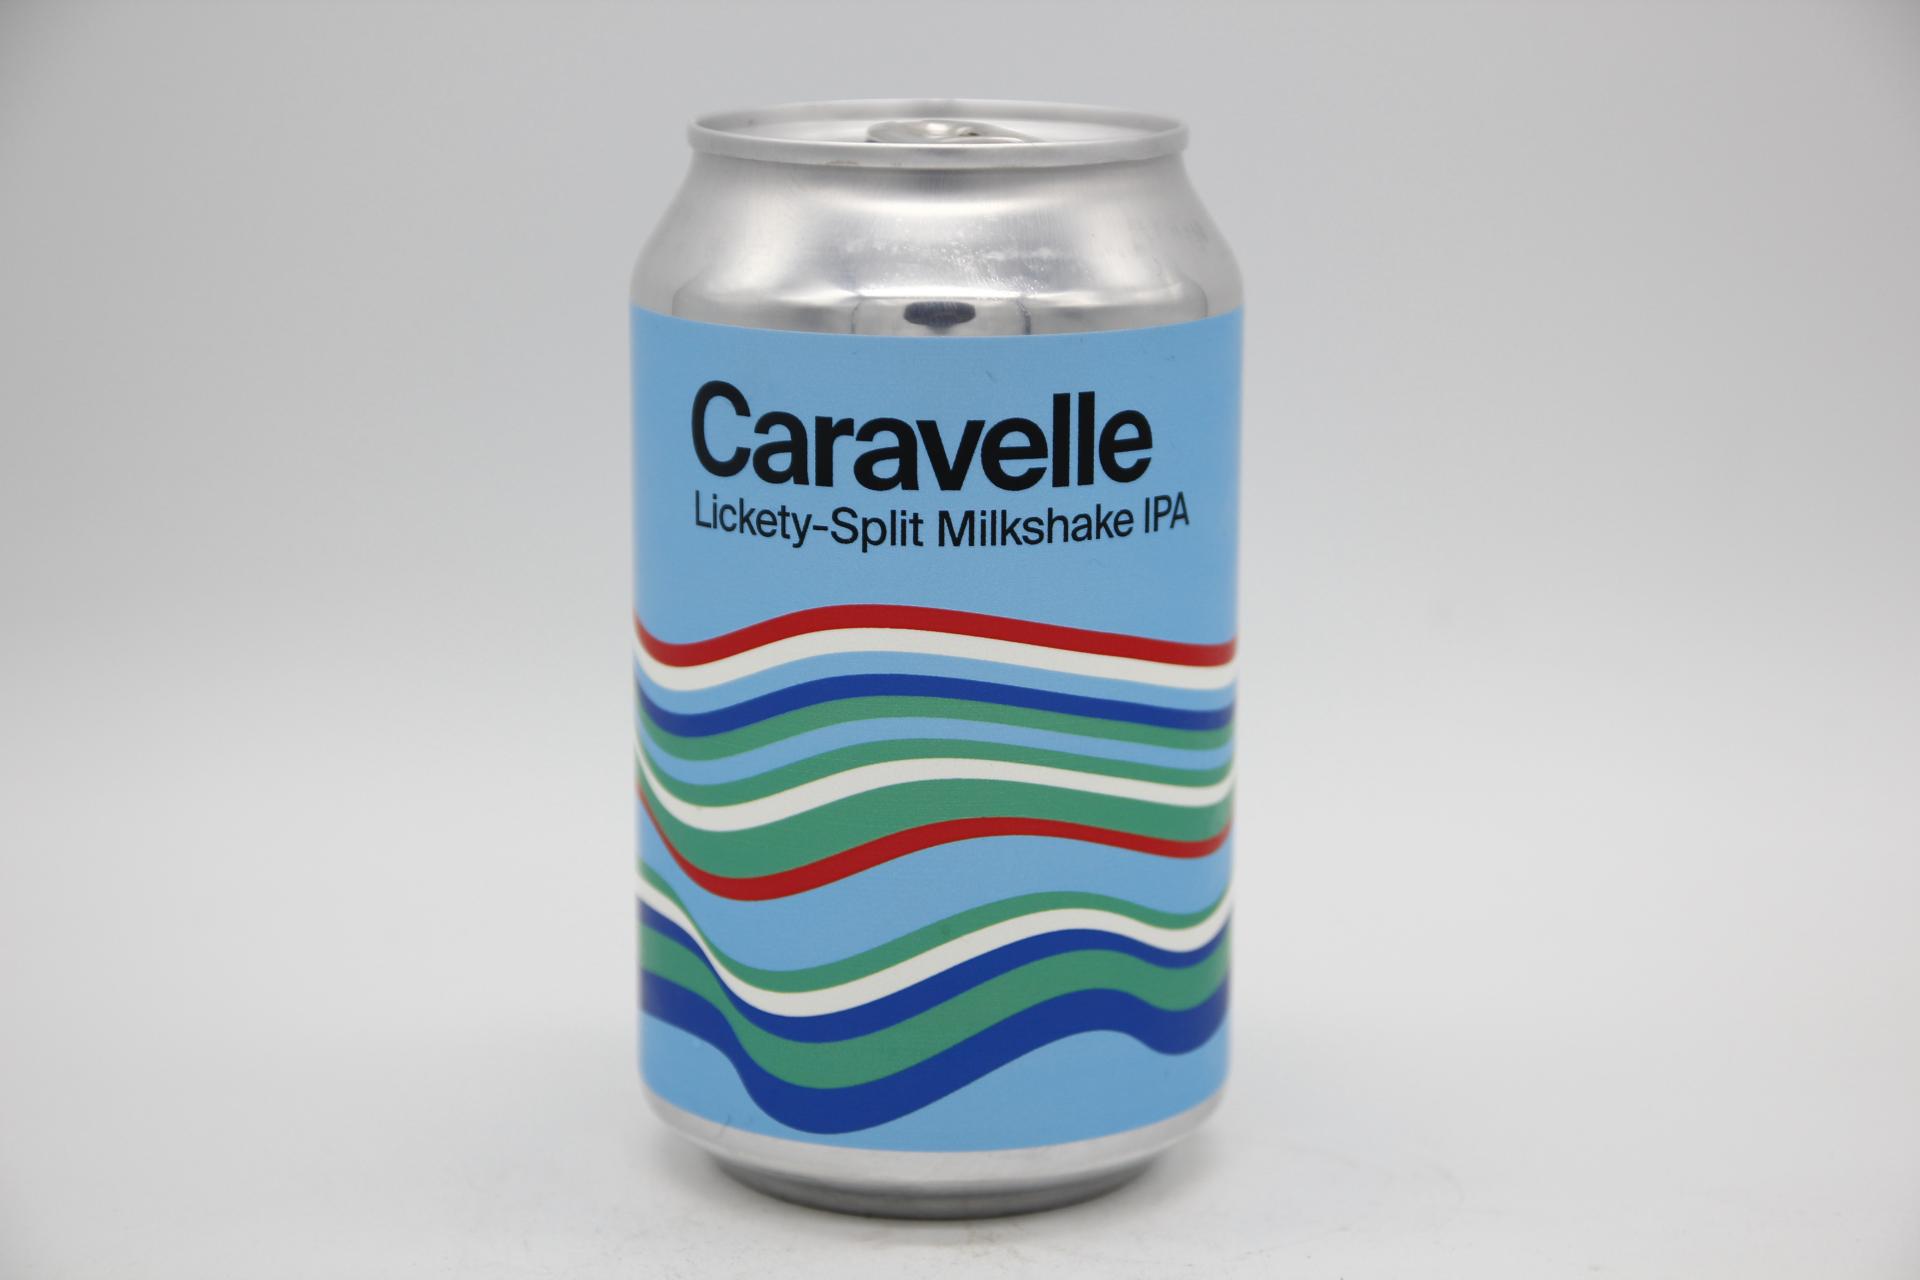 CARAVELLE - LICKETY 33cl